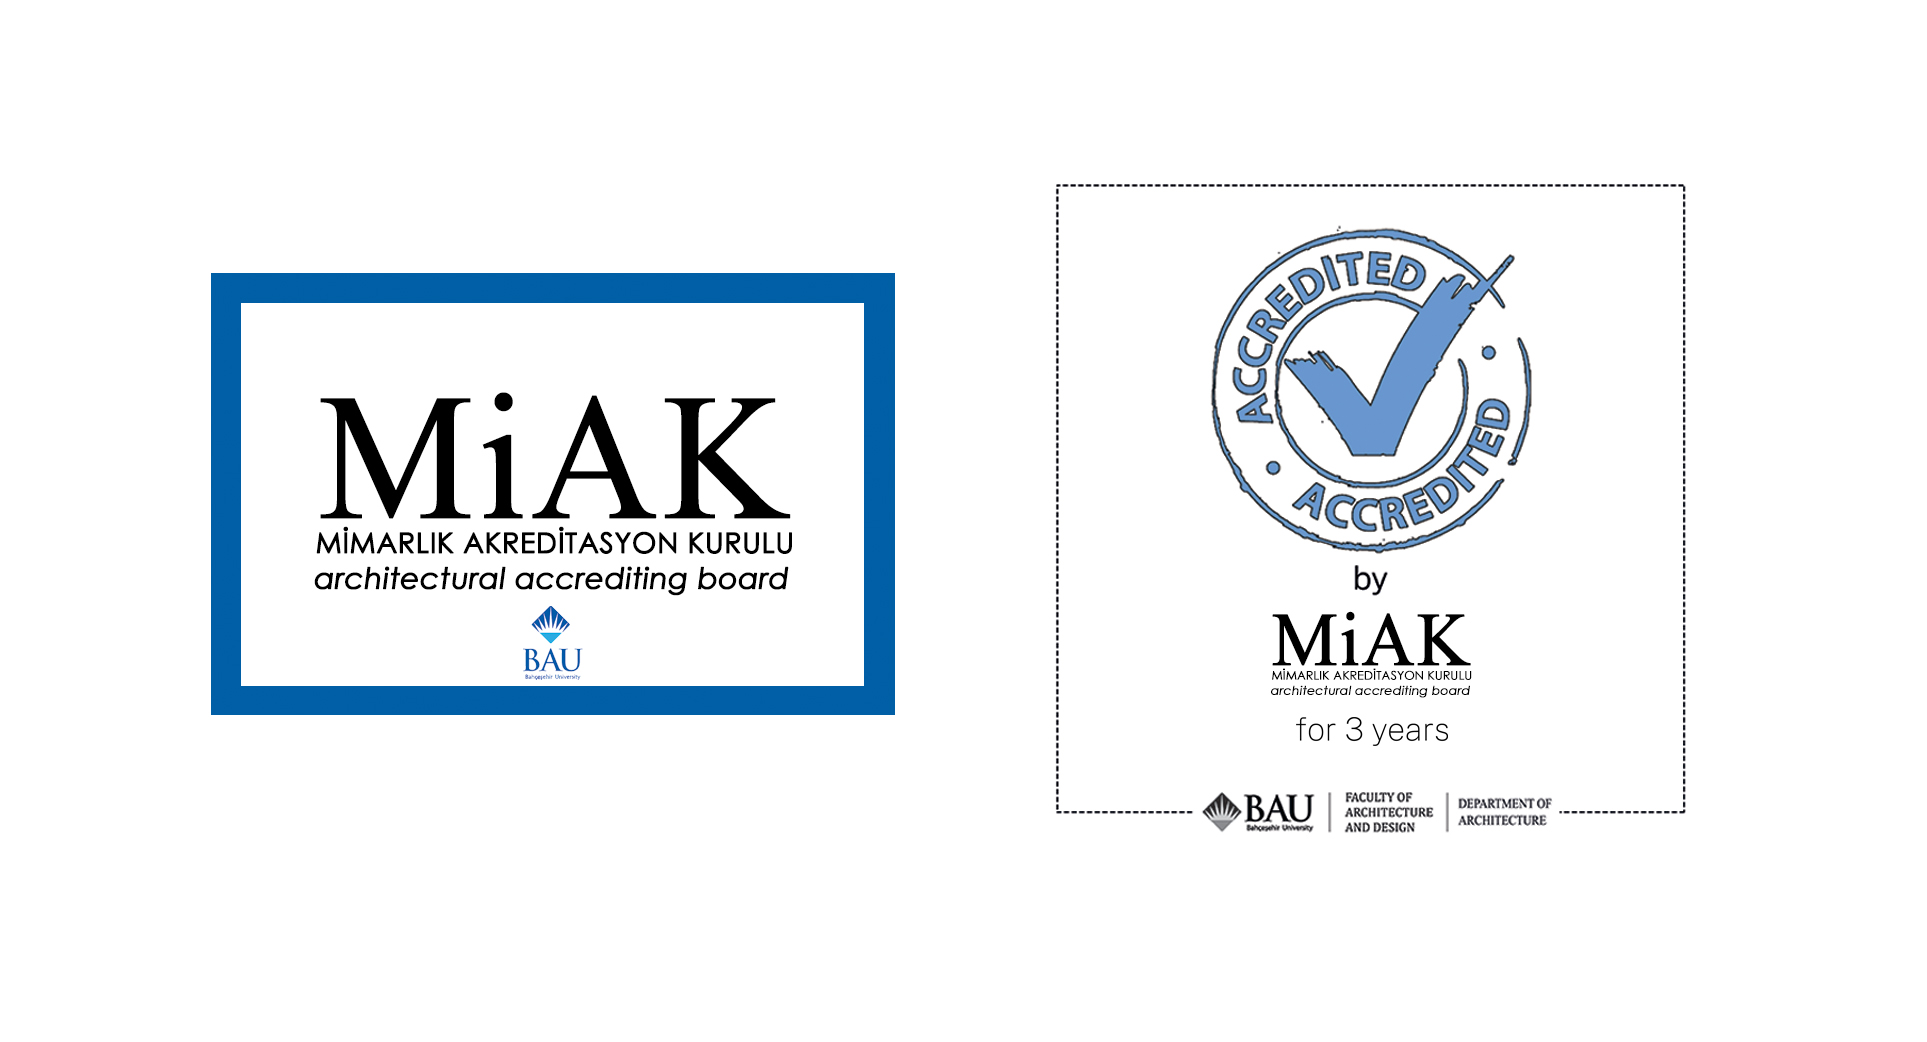 BAU Department of Architecture is MIAK accredited since 2020.